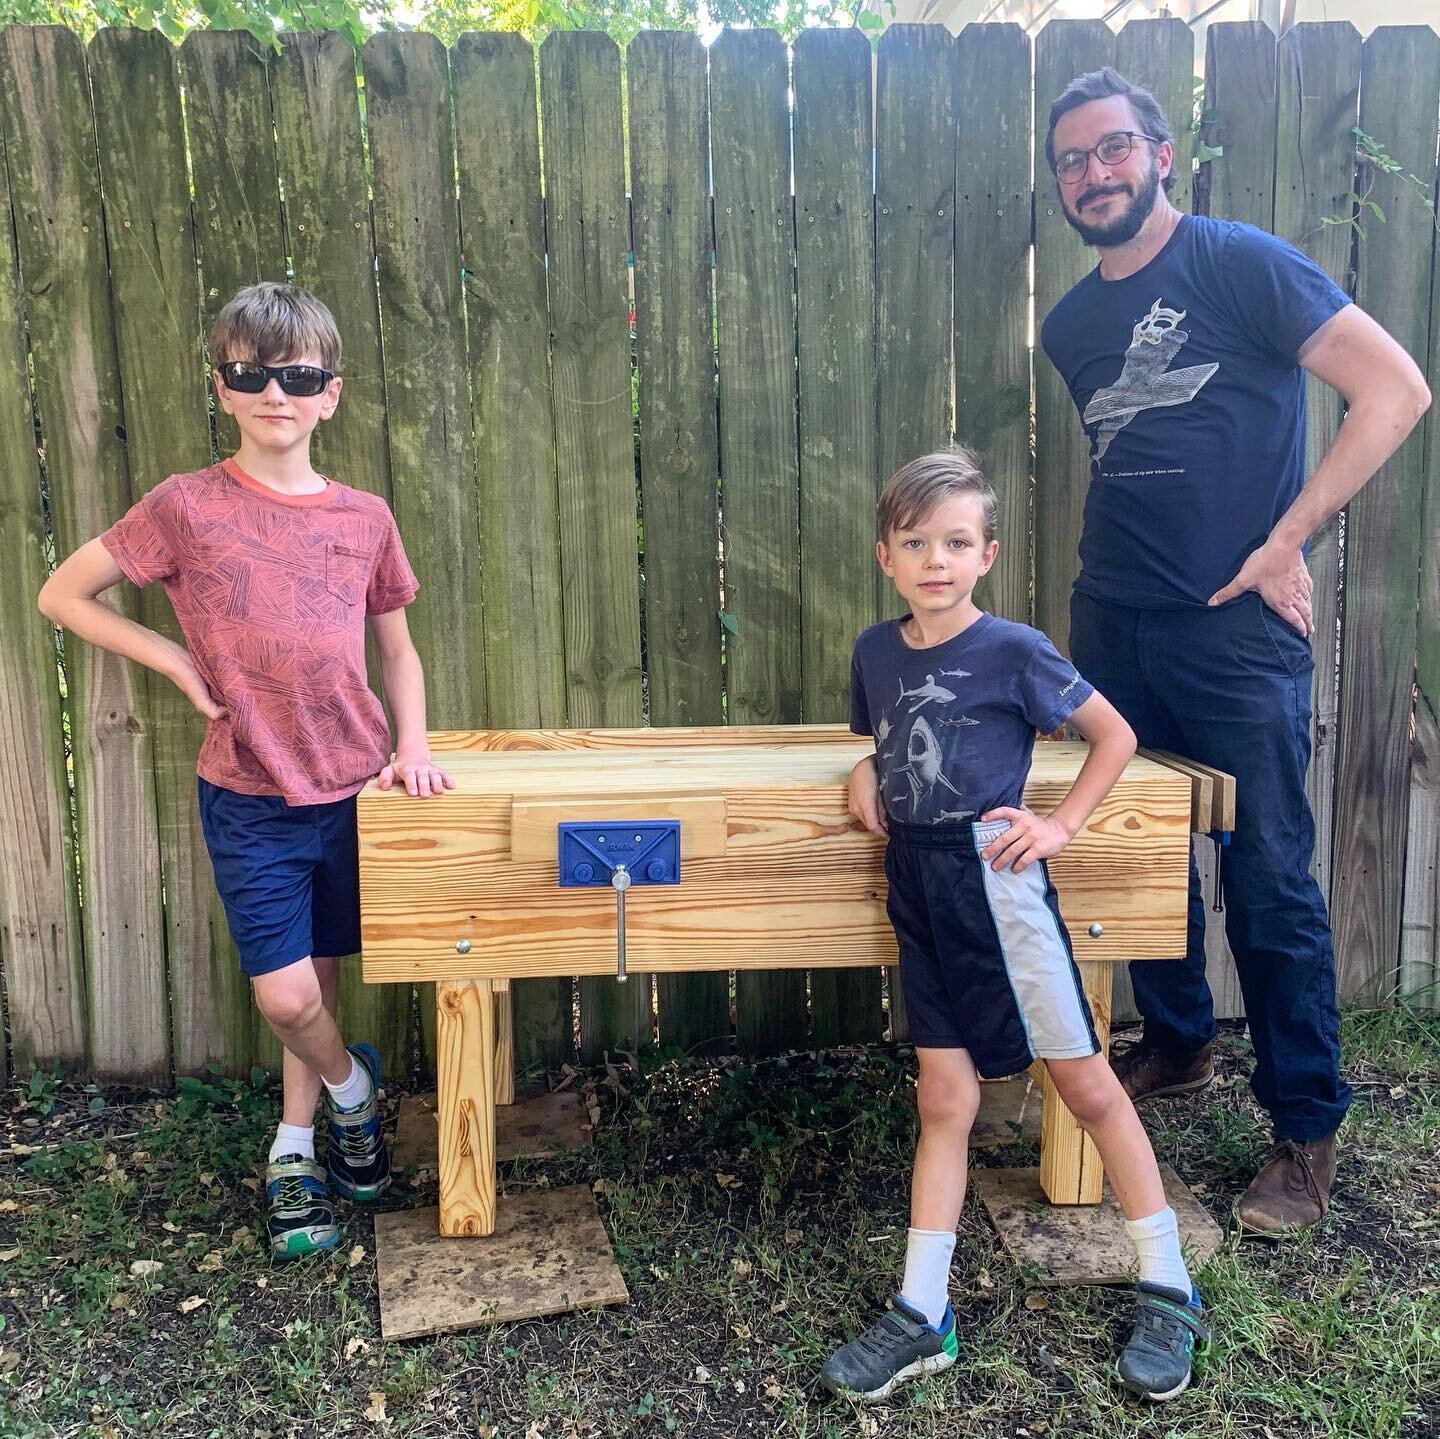 Happy customers putting together their new workbench! Click the link in our bio to find out more about the best children&rsquo;s workbench this side of the Mississippi!

#woodworking #kidswoodworking #nyckids #homelearning #montessoriathome #montesso